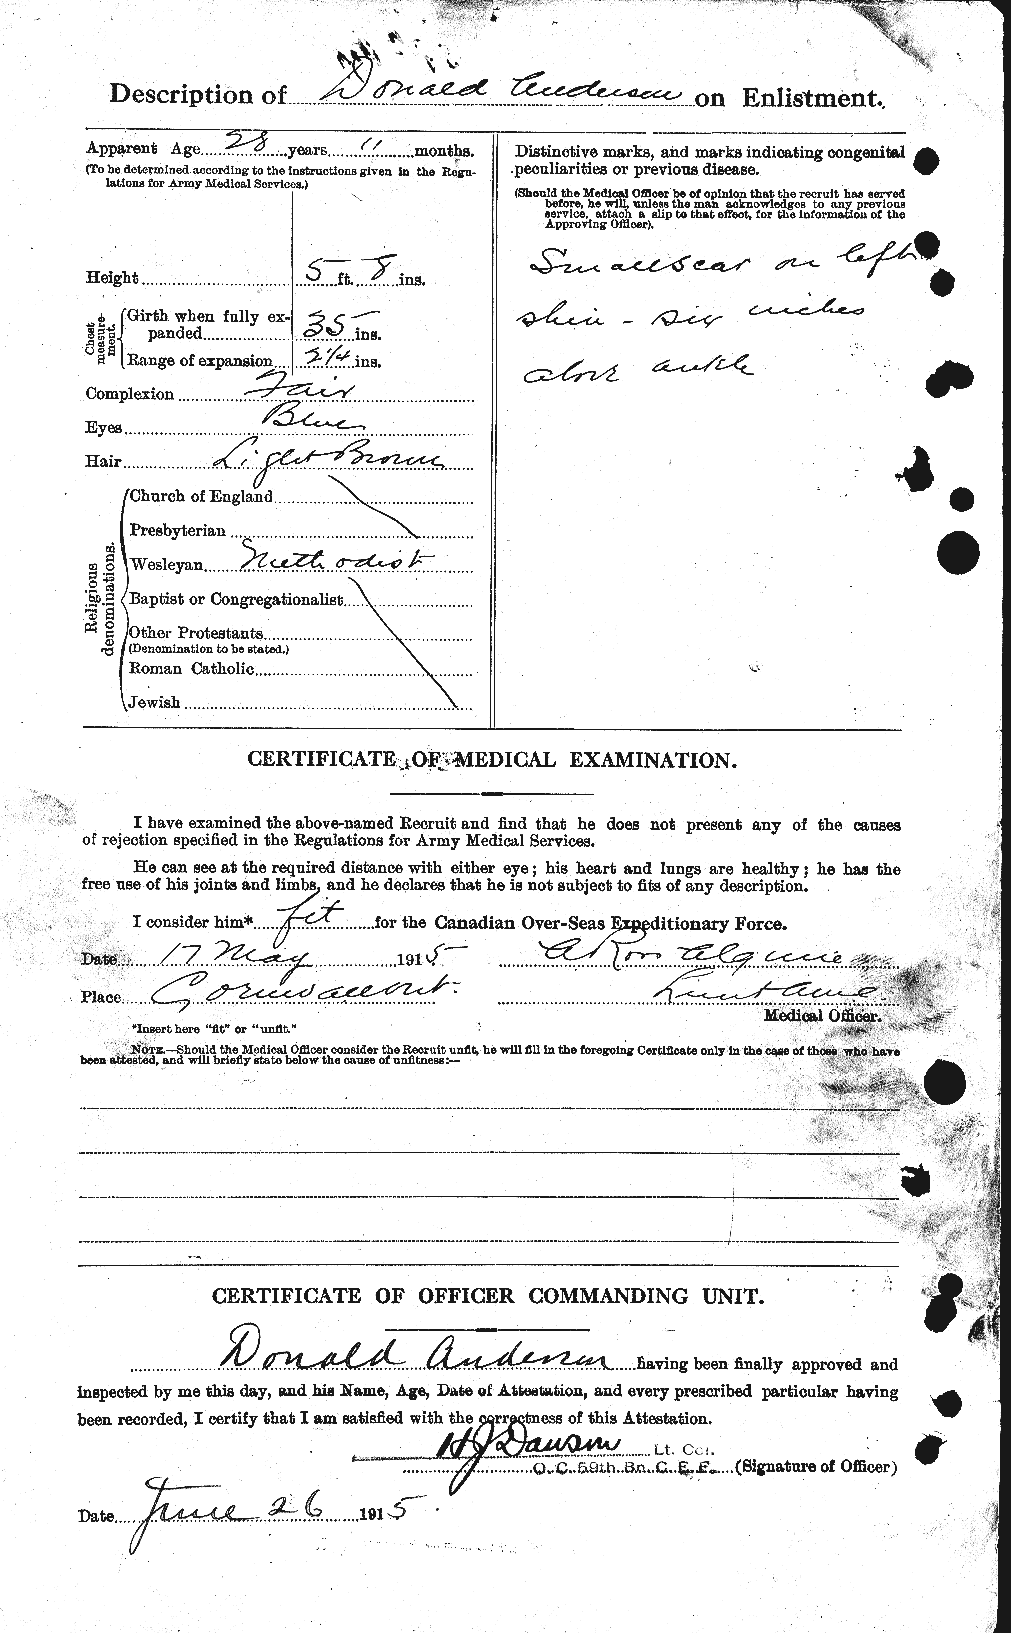 Personnel Records of the First World War - CEF 209989b